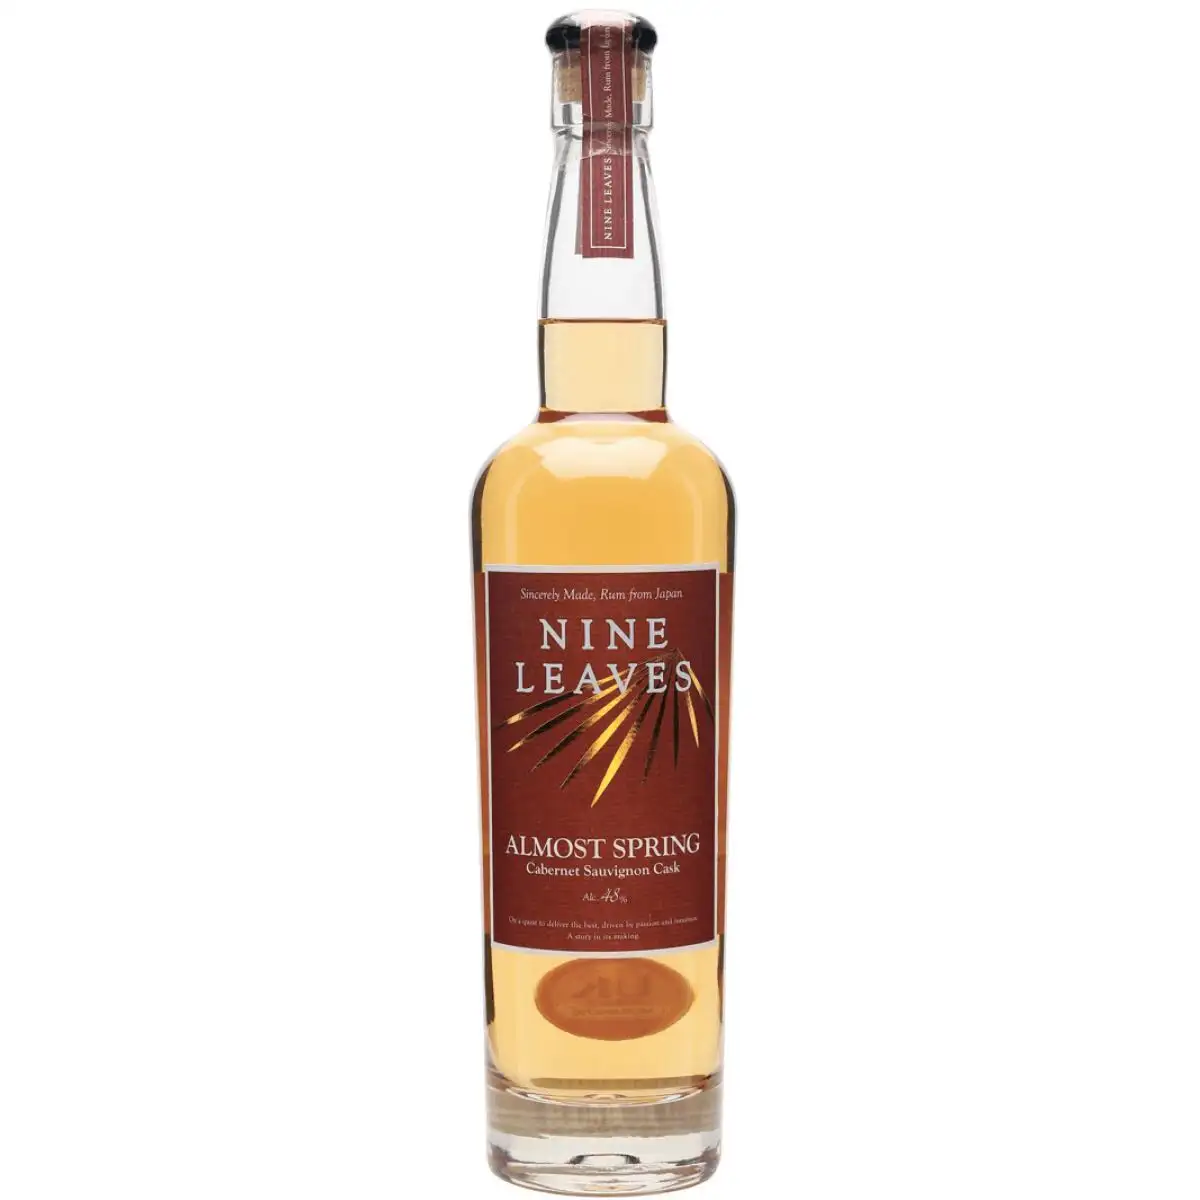 Image of the front of the bottle of the rum Almost Spring Cabernet Sauvignon Cask